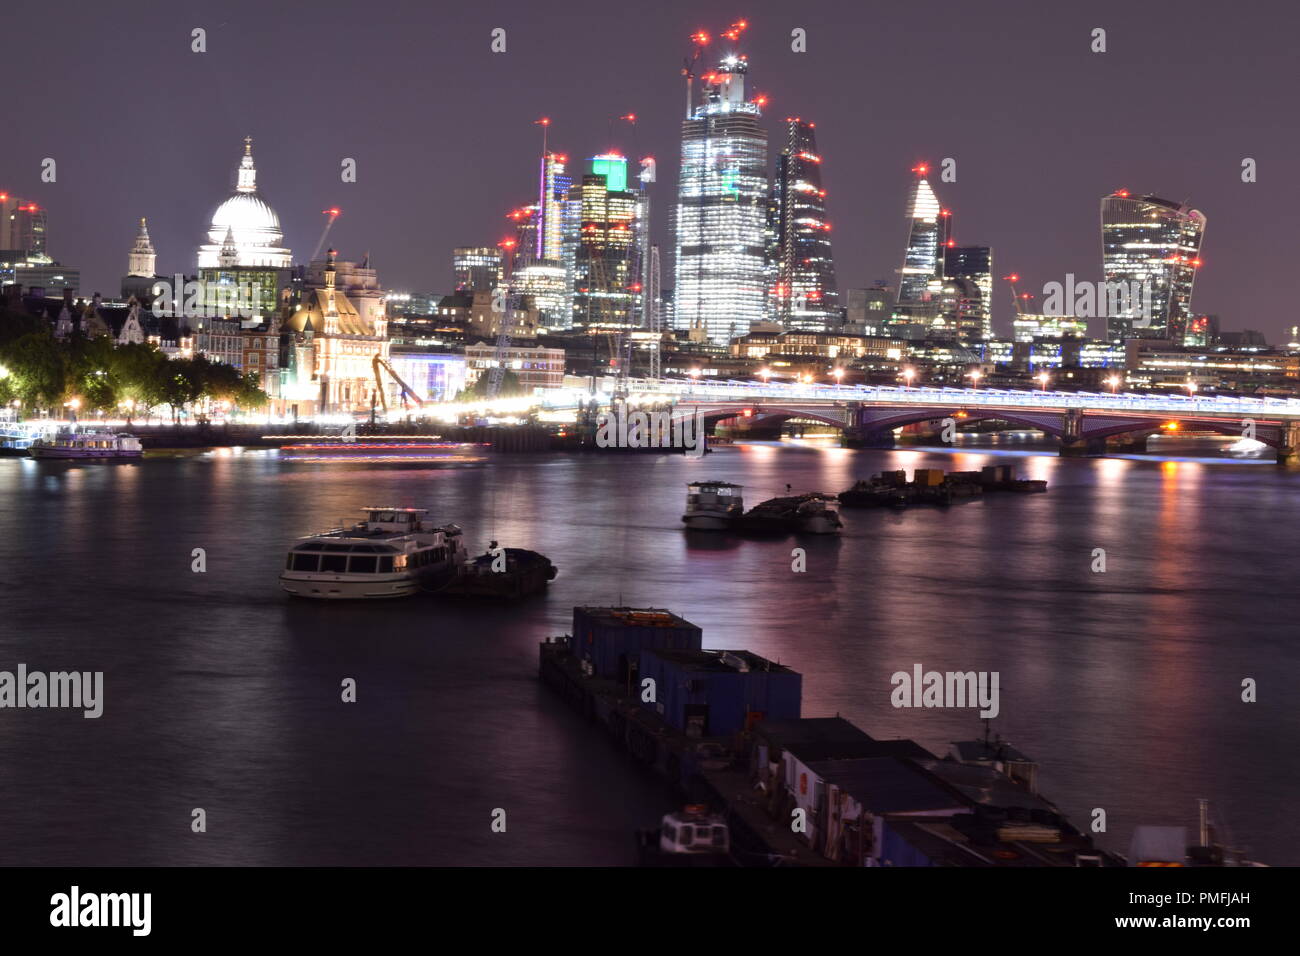 London South Bank by night using long exposures to create light trails Stock Photo